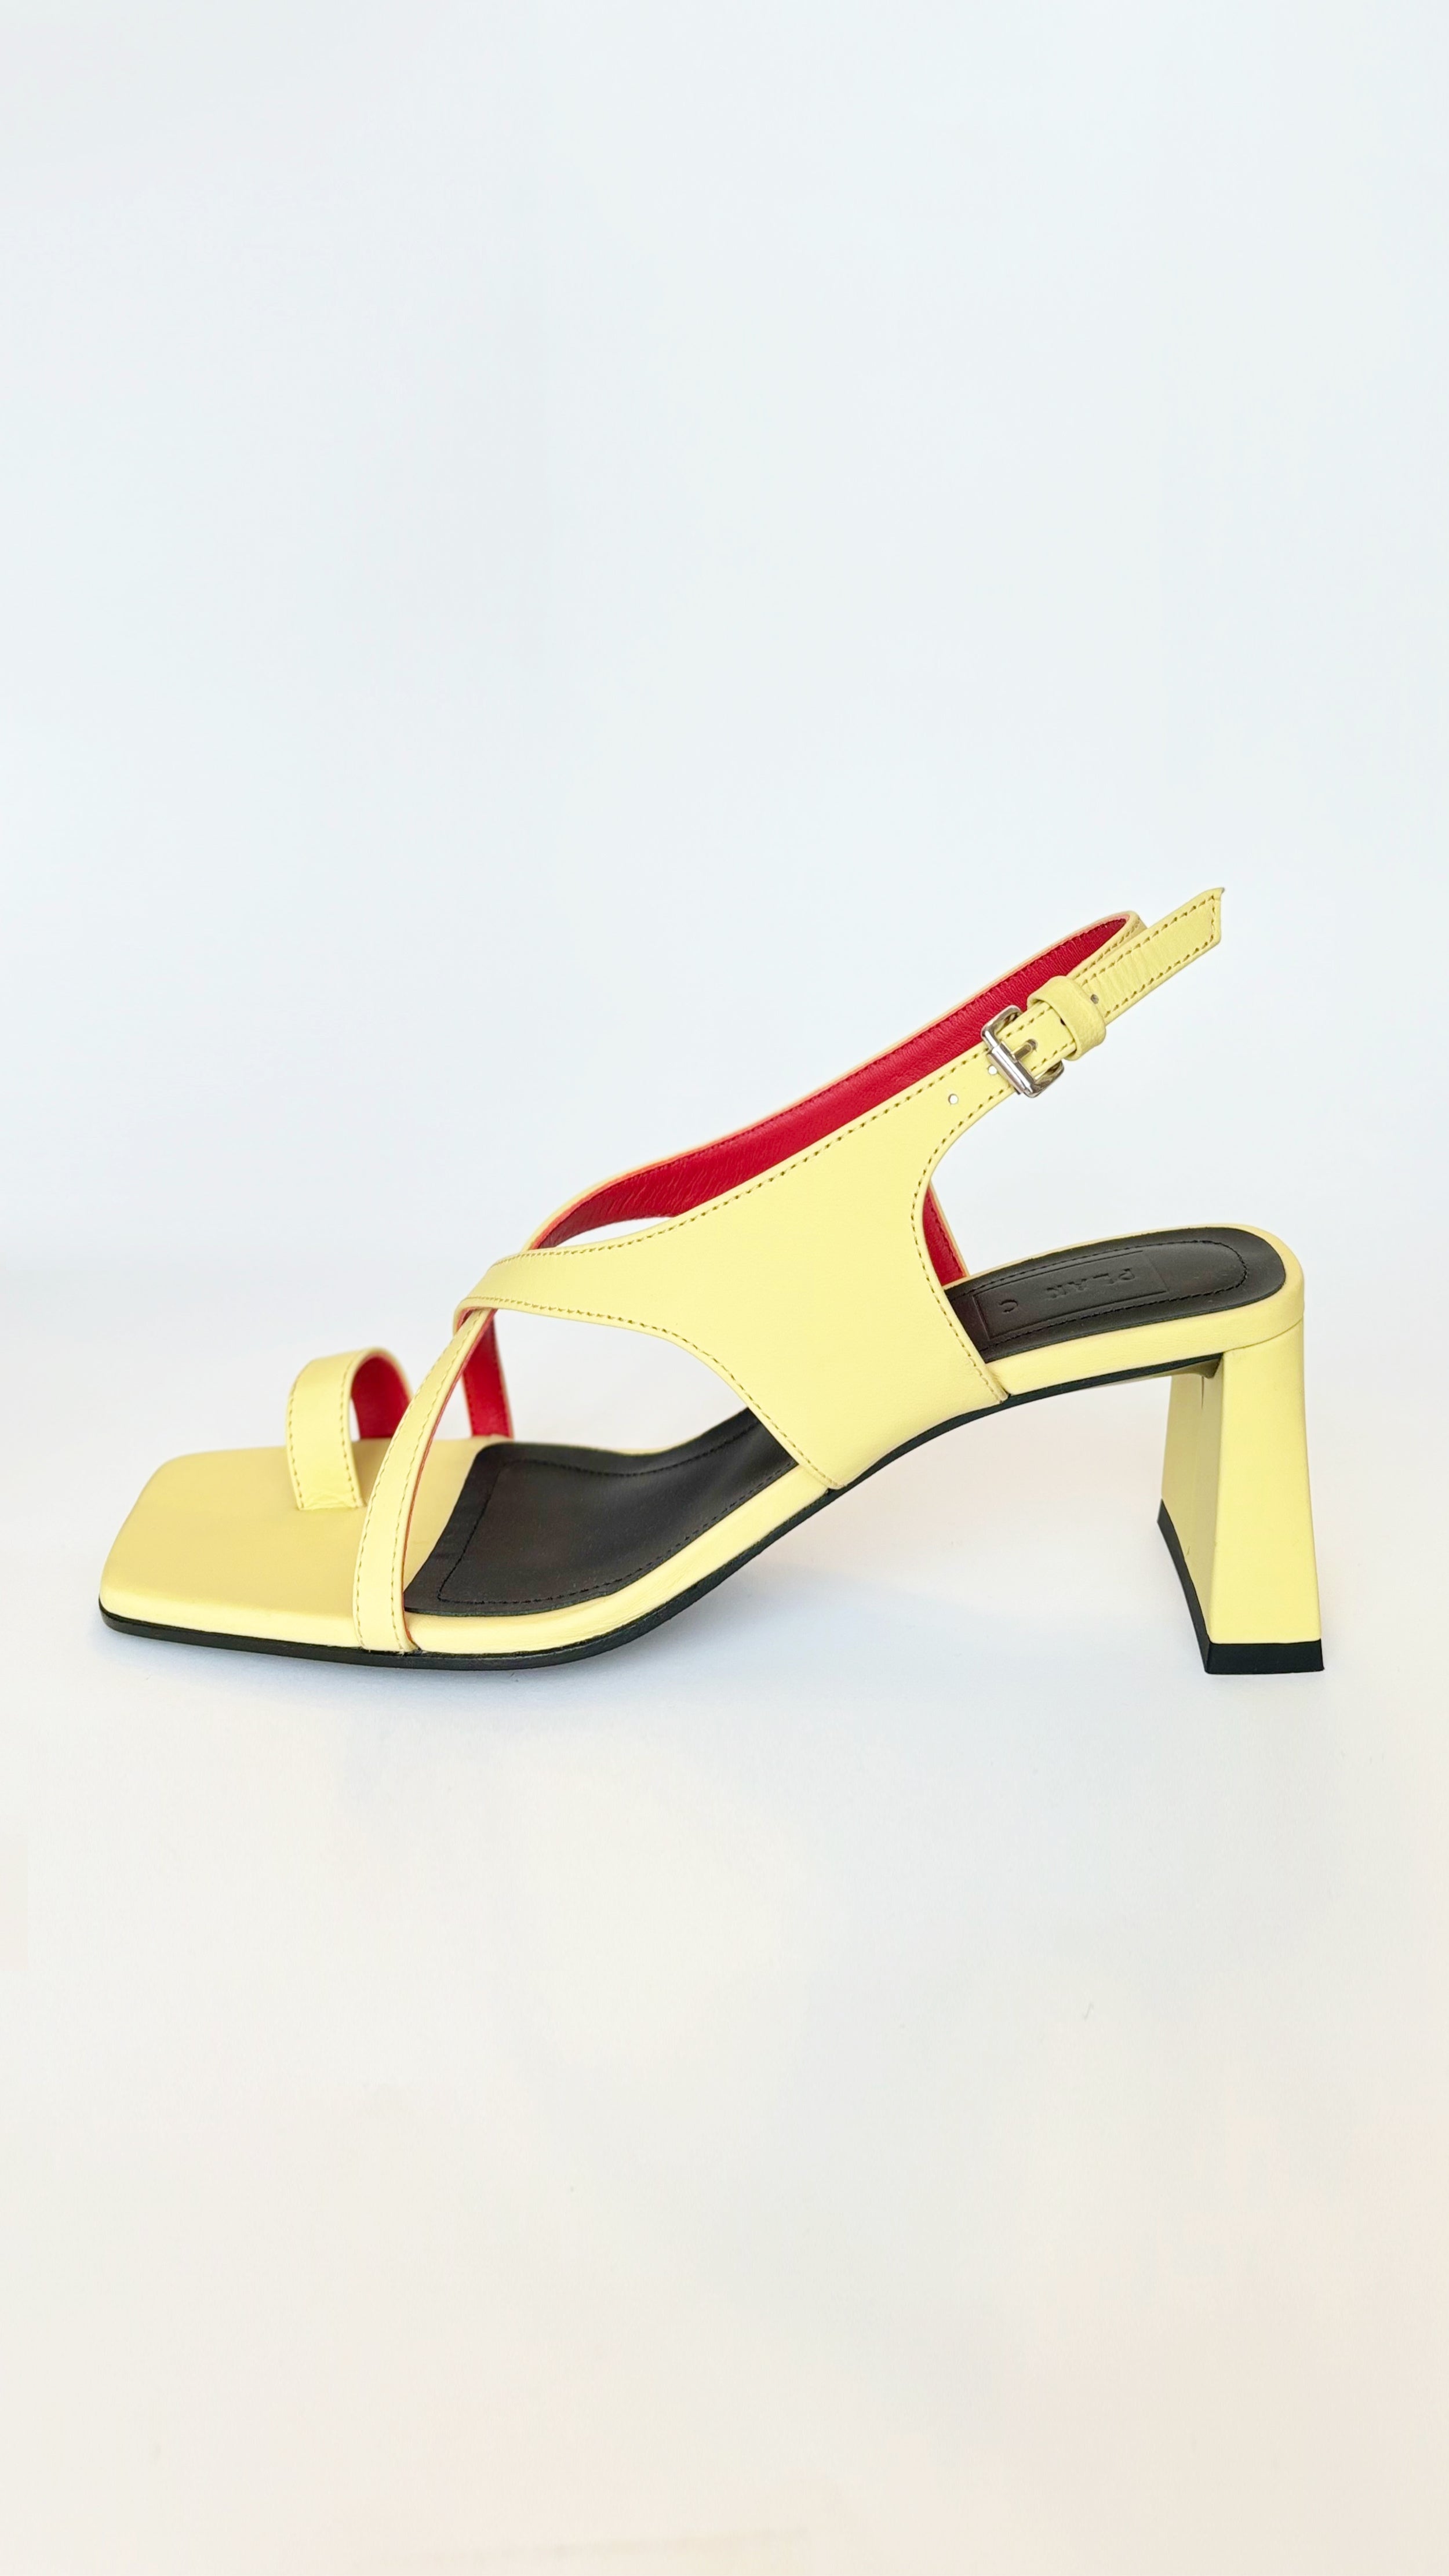 Plan C Crisscross Toe-Loop Slingback Sandals. In yellow leather exterior with a pop of red interior. It features one toe loop, open toe heeled sandal with a criss cross of leather acorss the top. Stack heel in the back. Pair shown facing side interior.